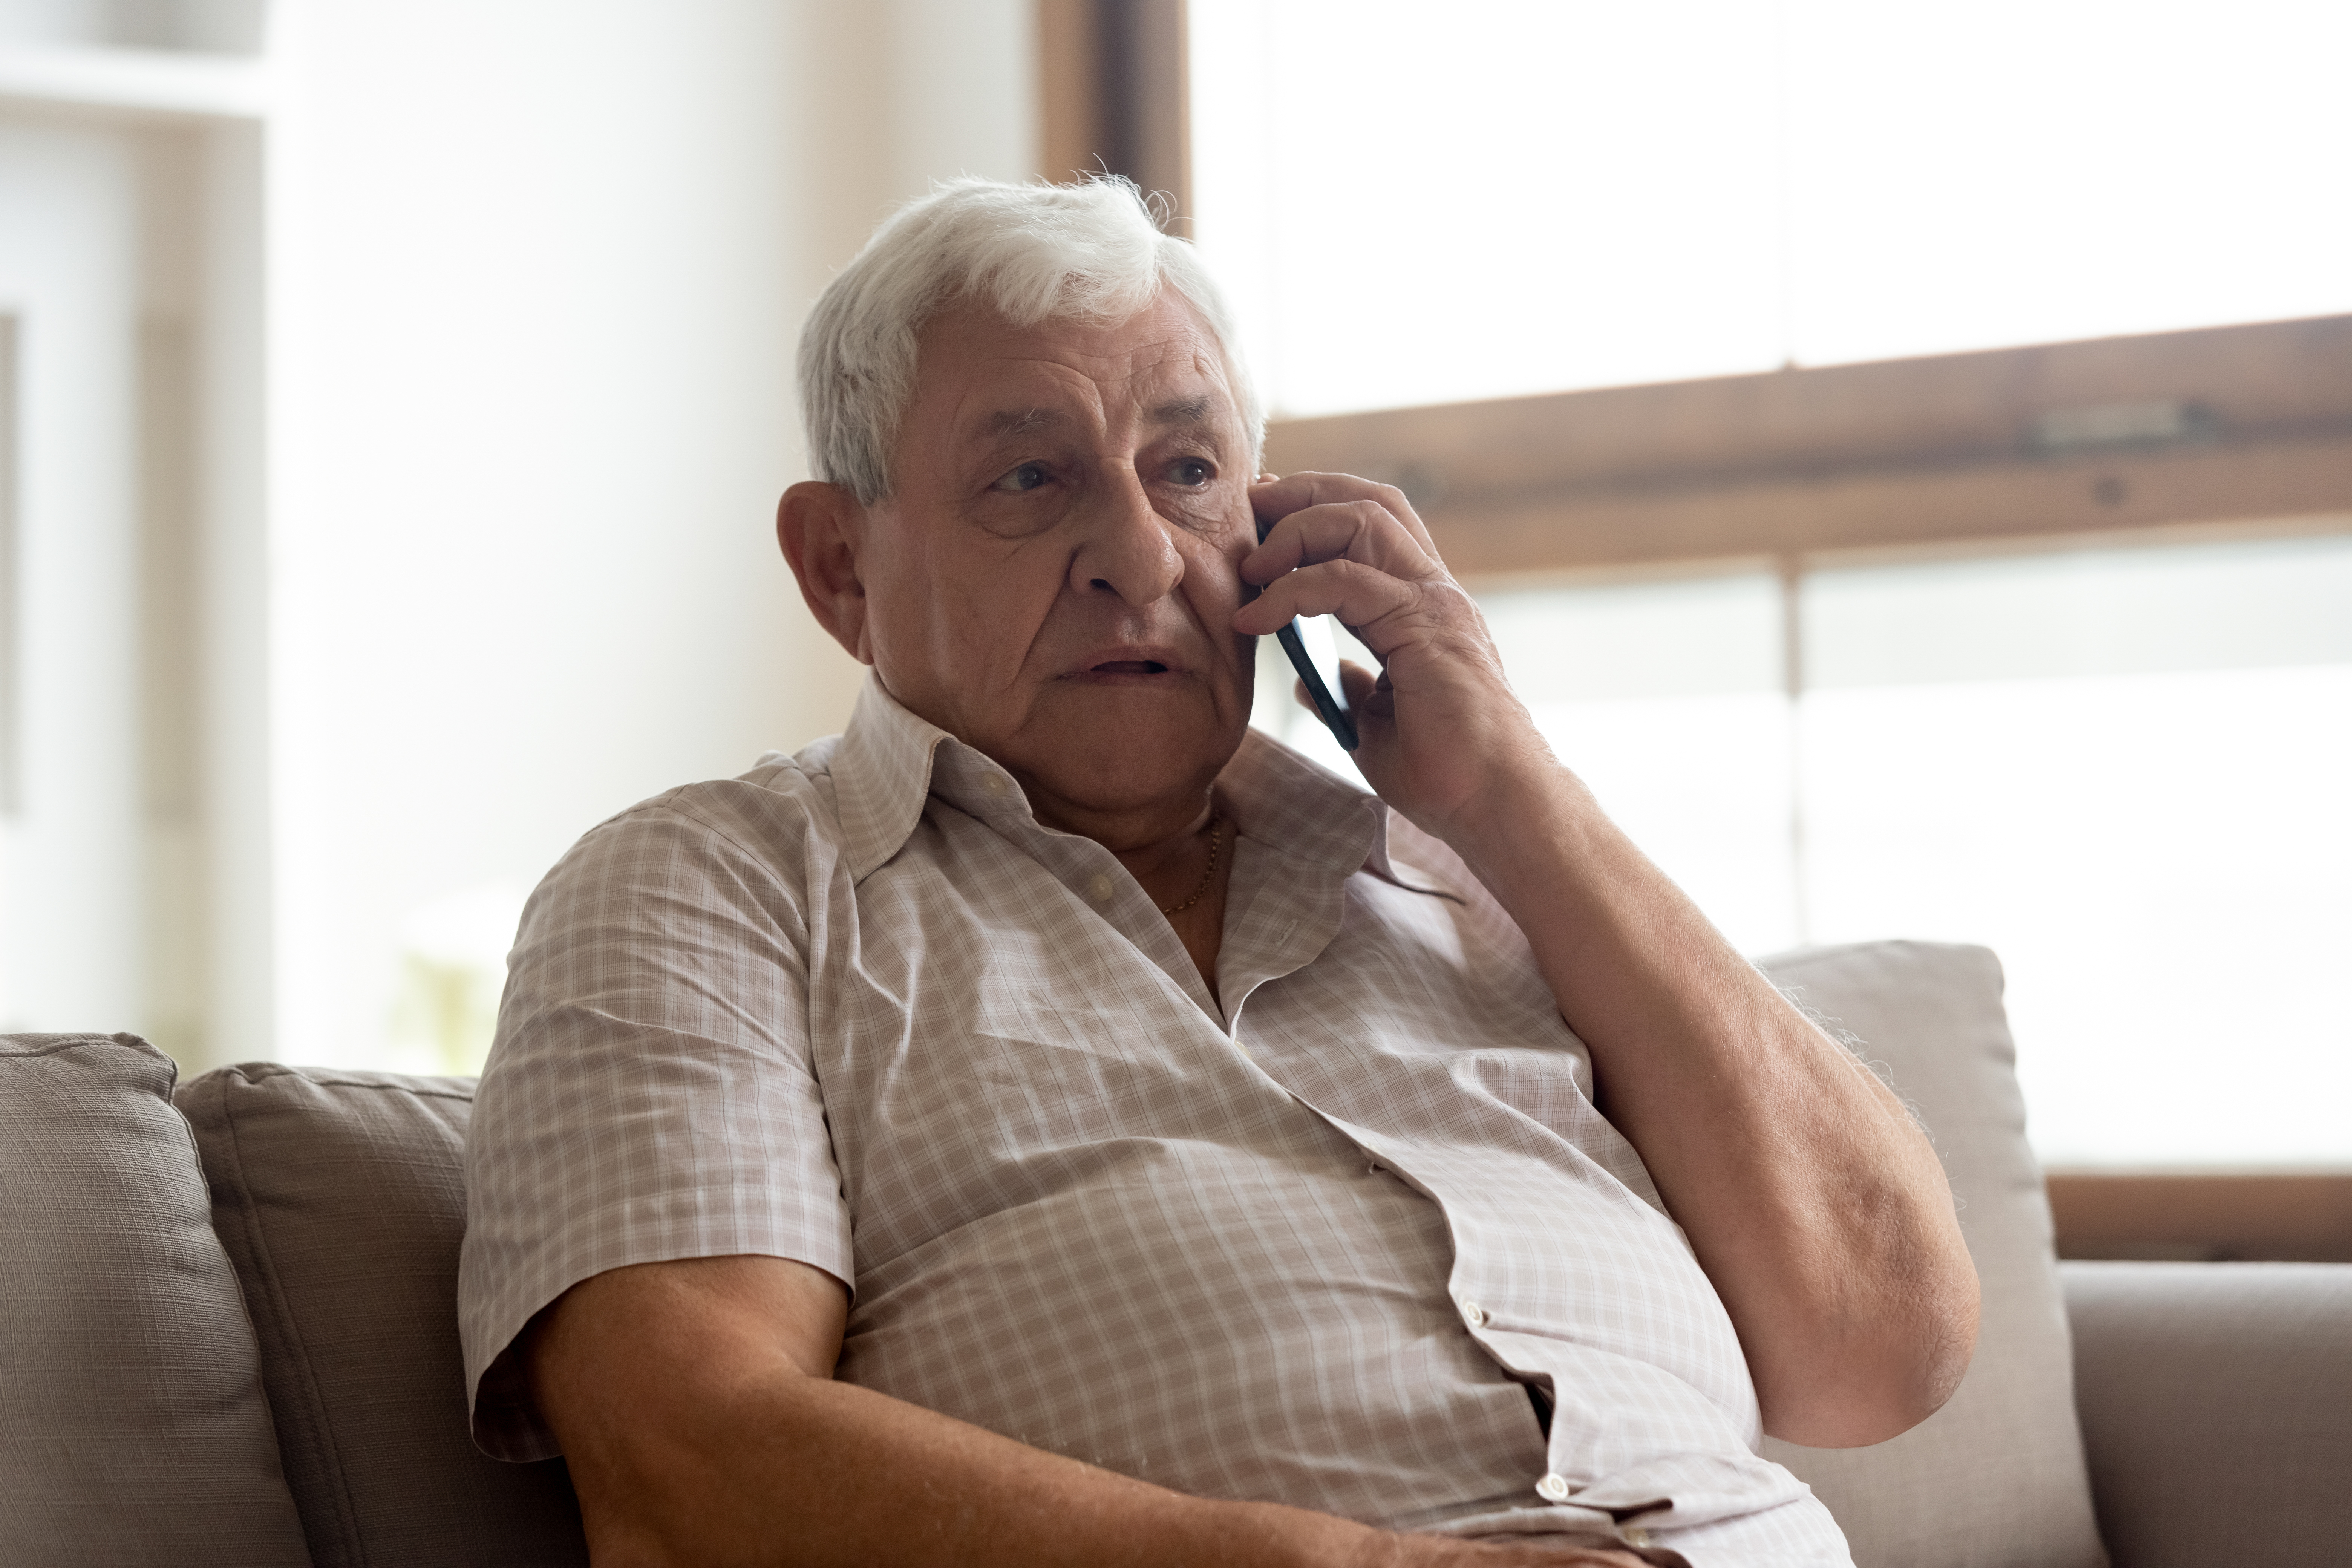 Old man on the phone | Source: Shutterstock